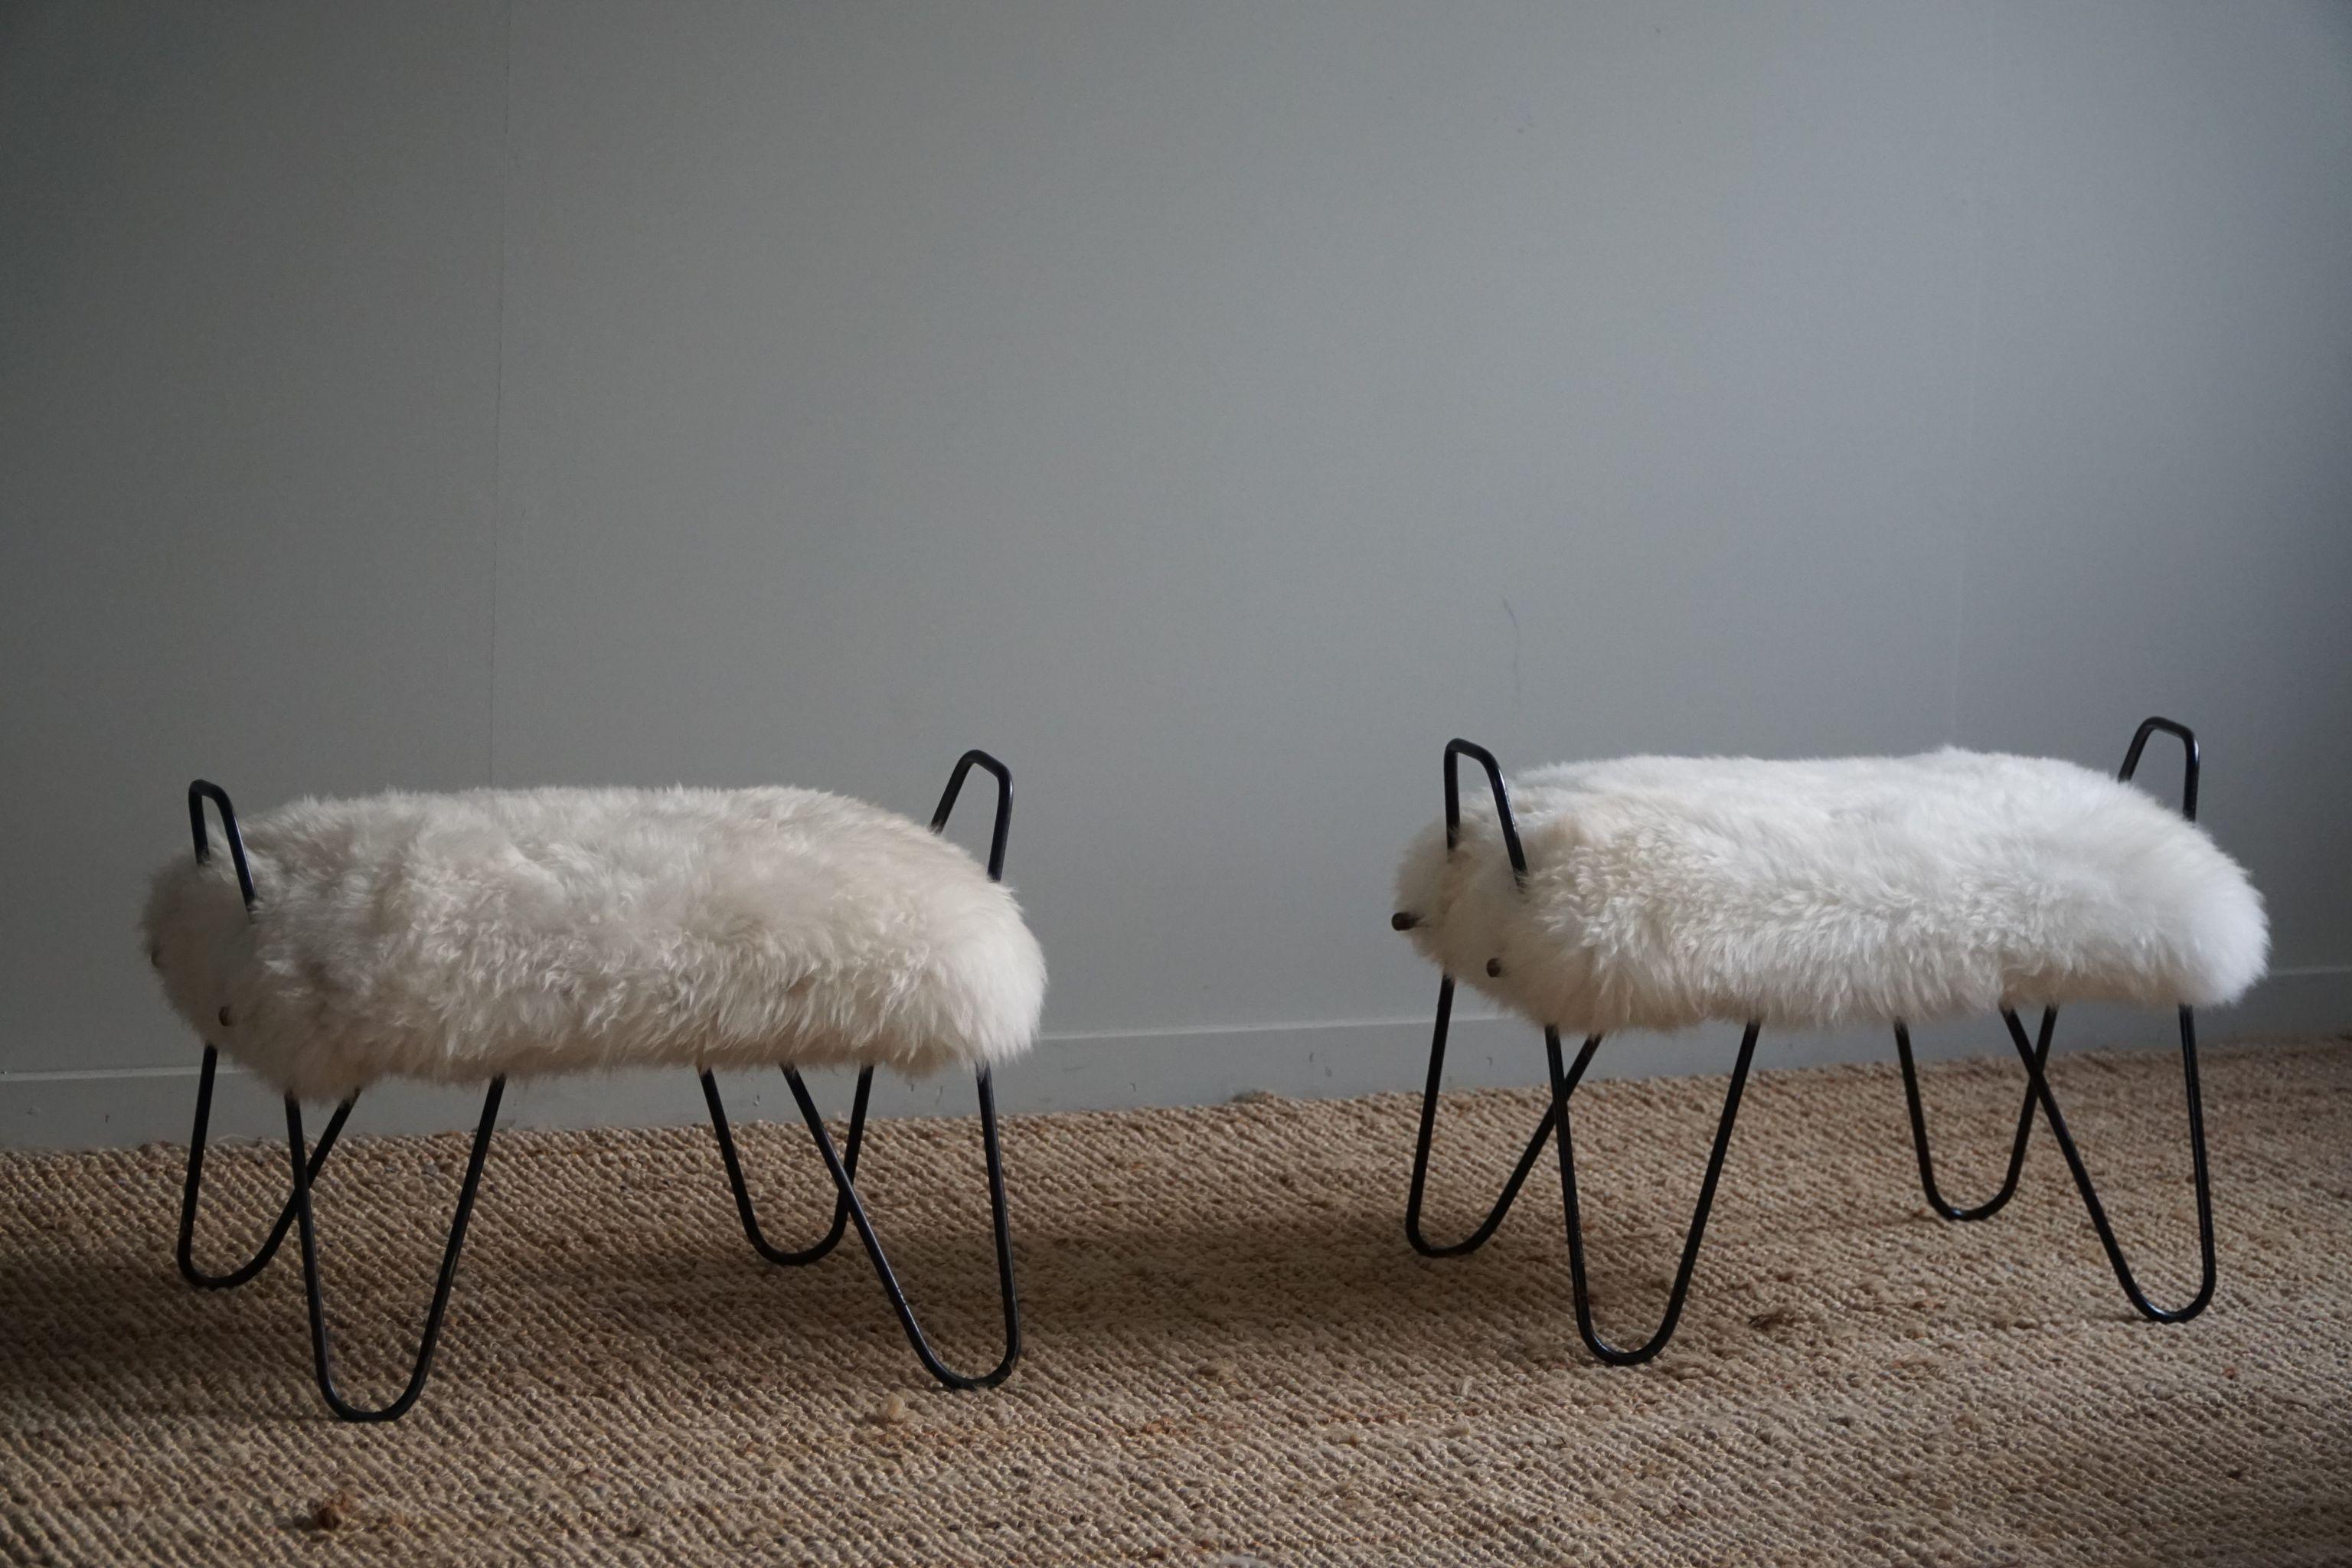 A Pair of Stools in Steel and Icelandic Lambswool, Mid Century Modern, 1960s For Sale 11